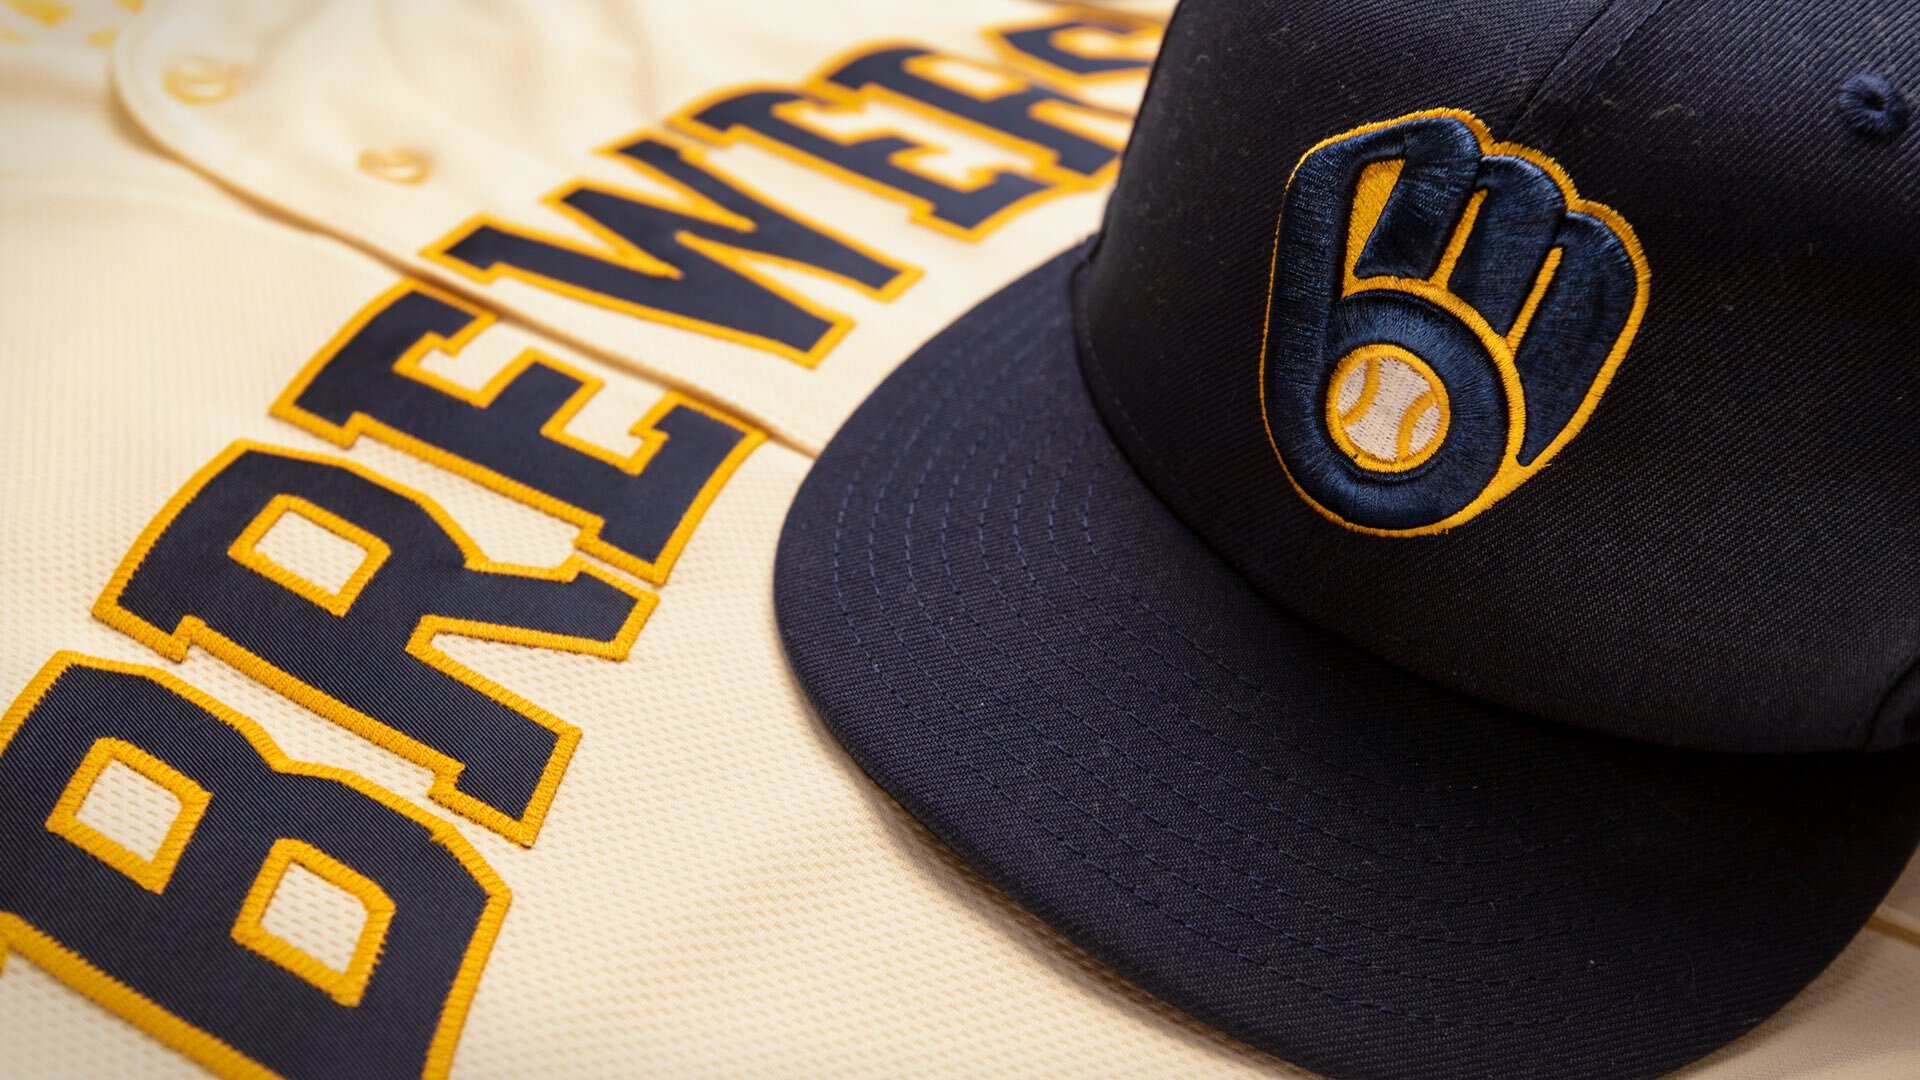 New Uniforms for the Milwaukee Brewers — UNISWAG